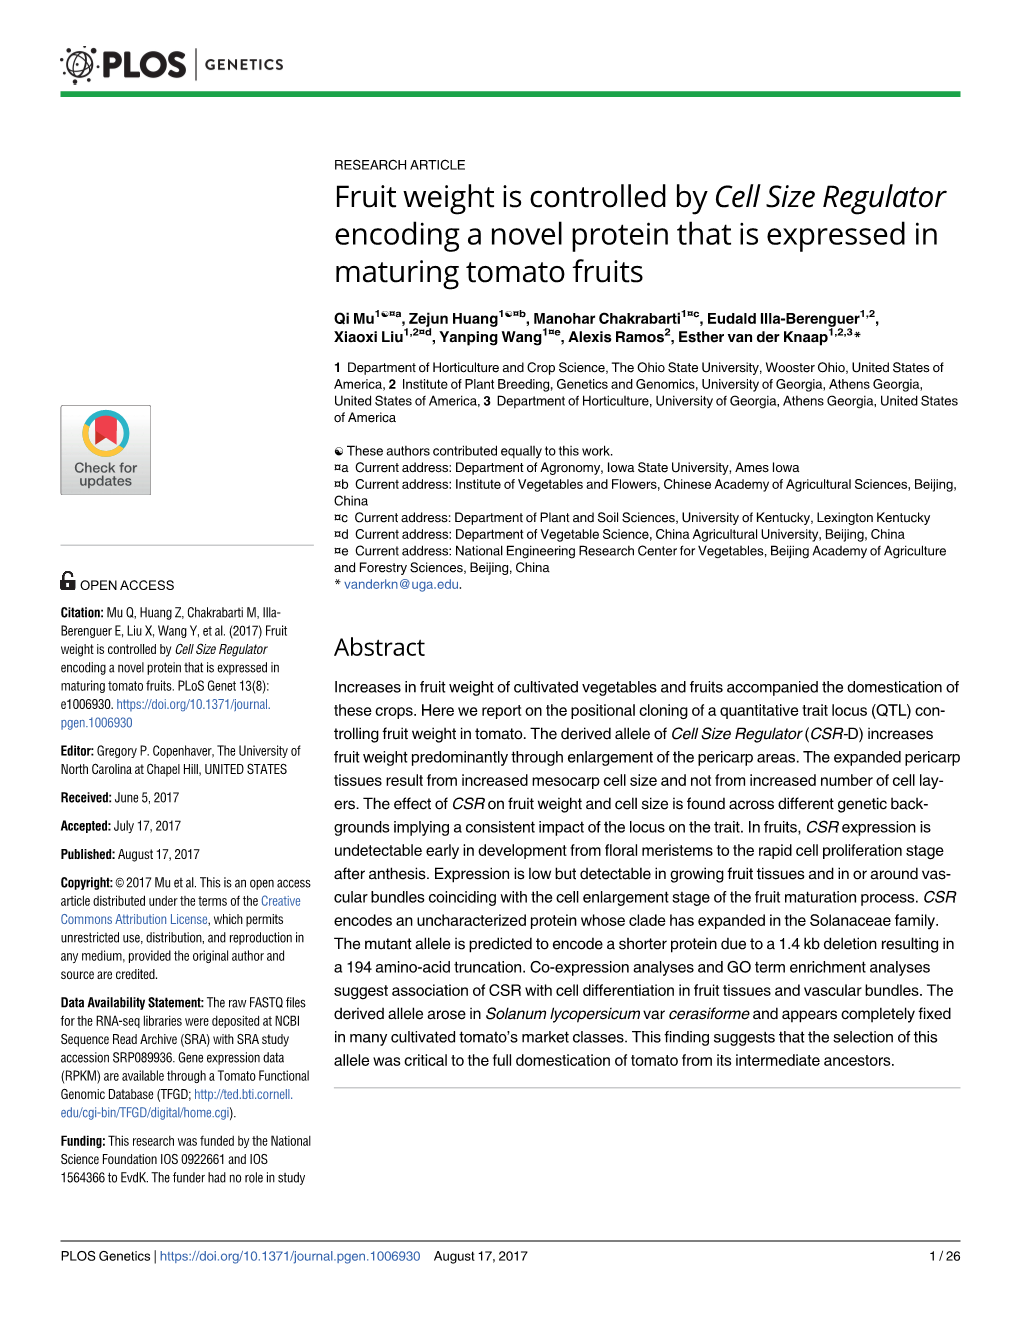 Fruit Weight Is Controlled by Cell Size Regulator Encoding a Novel Protein That Is Expressed in Maturing Tomato Fruits